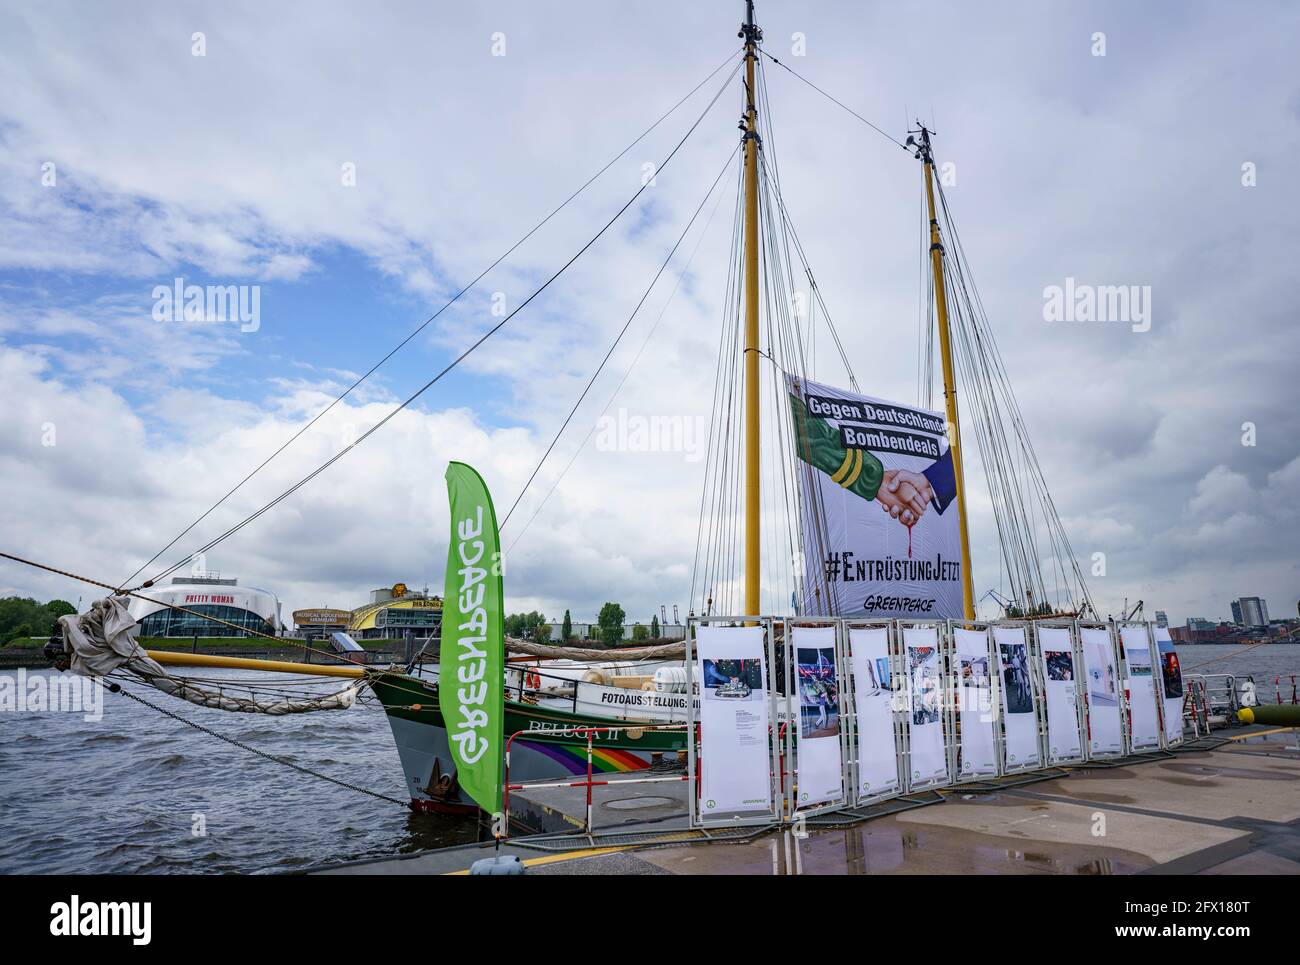 Hamburg, Germany. 25th May, 2021. The Greenpeace ship Beluga II, on which a  banner with the words "Against Germany's bomb deals. #EntrüstungJetzt", is  moored at the Überseebrücke in the harbour. The ship